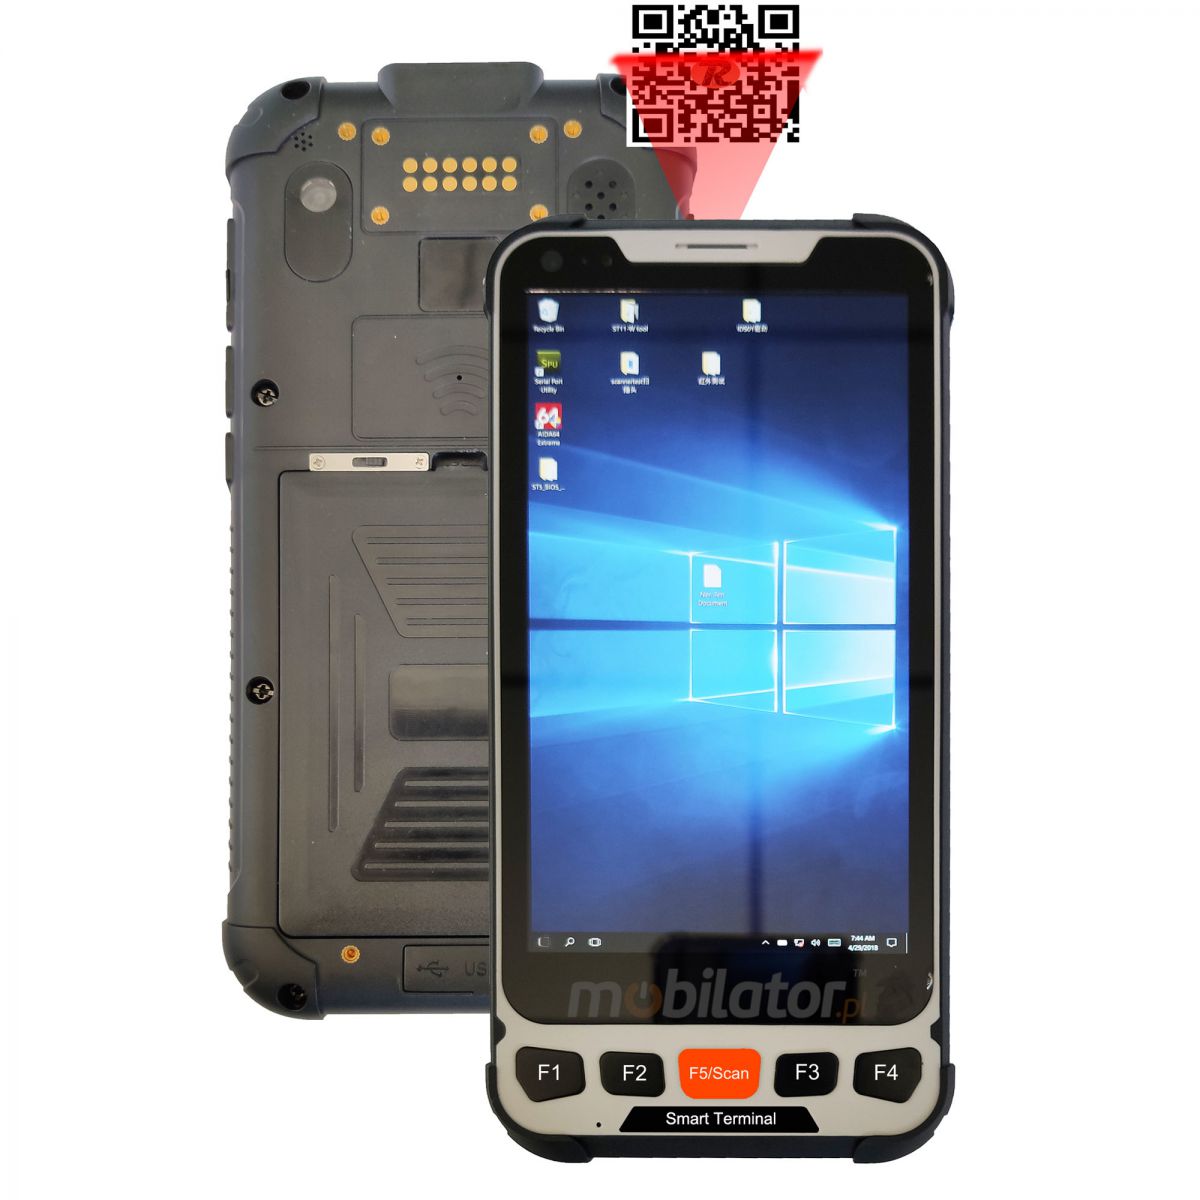 Mobipad SH5 v.4 - Data terminal with UHF RFID M500 scanner, NFC, 4G and Bluetooth 4.0, 2D code scanner 